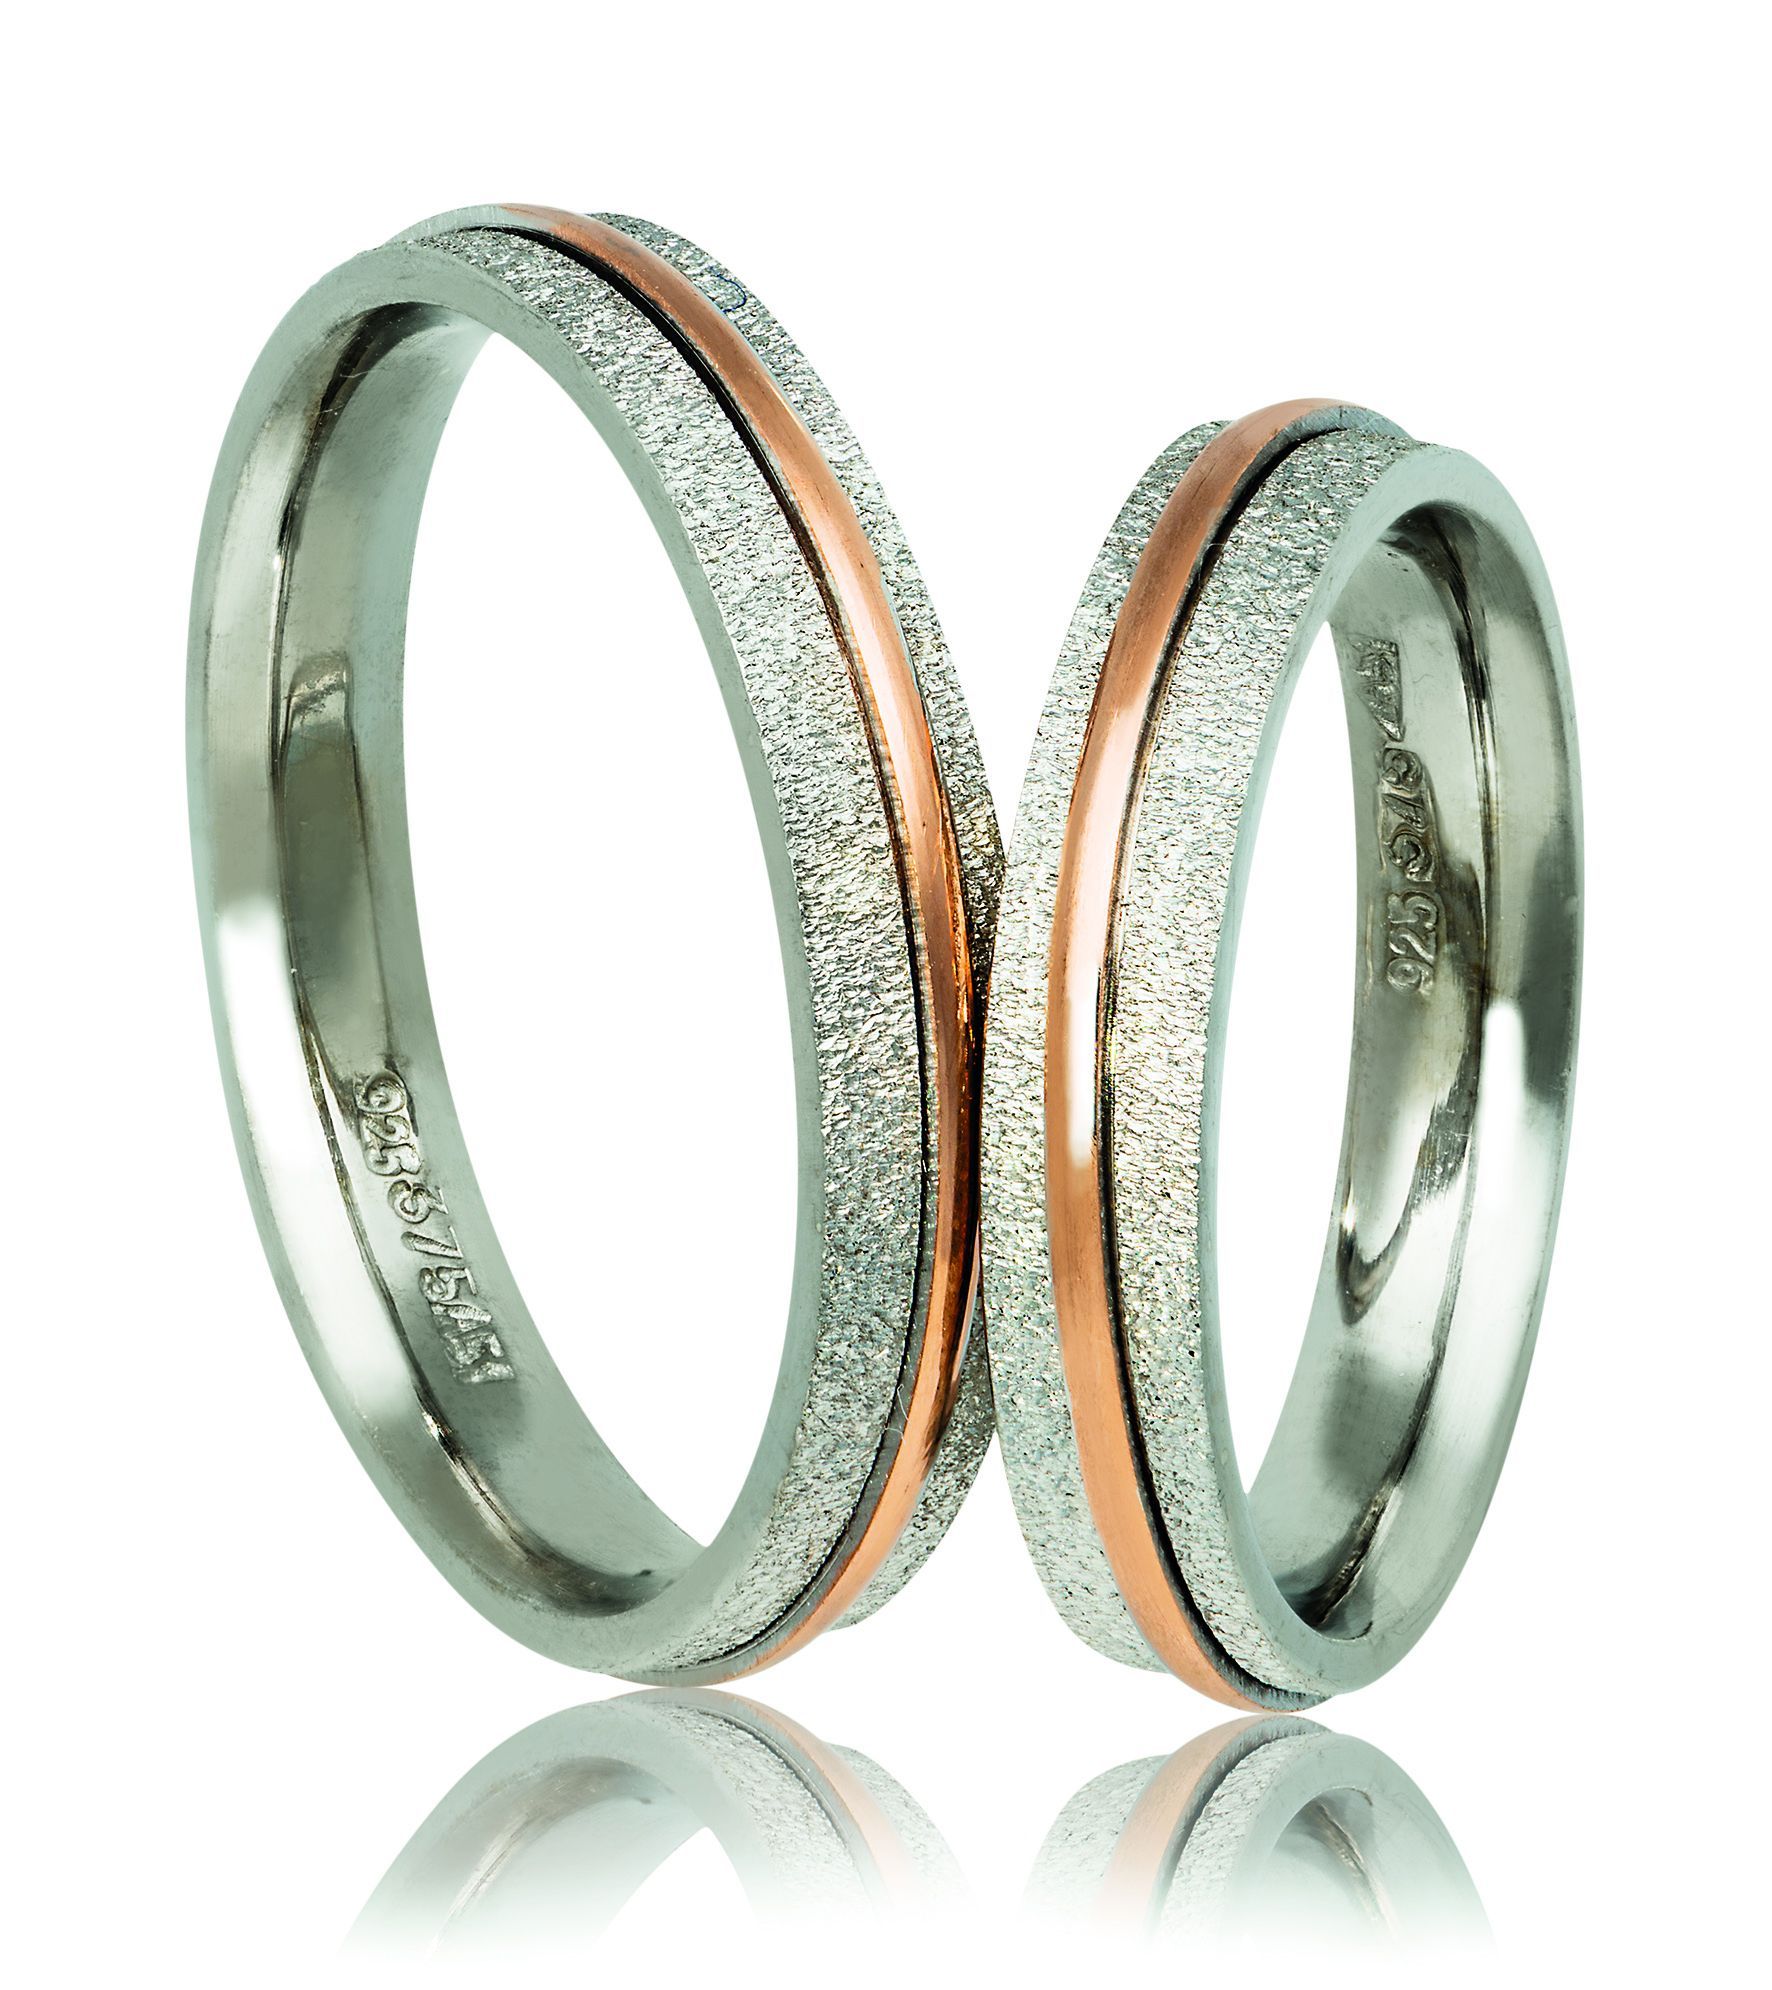 White gold & rose gold wedding rings 4mm (code A242r)